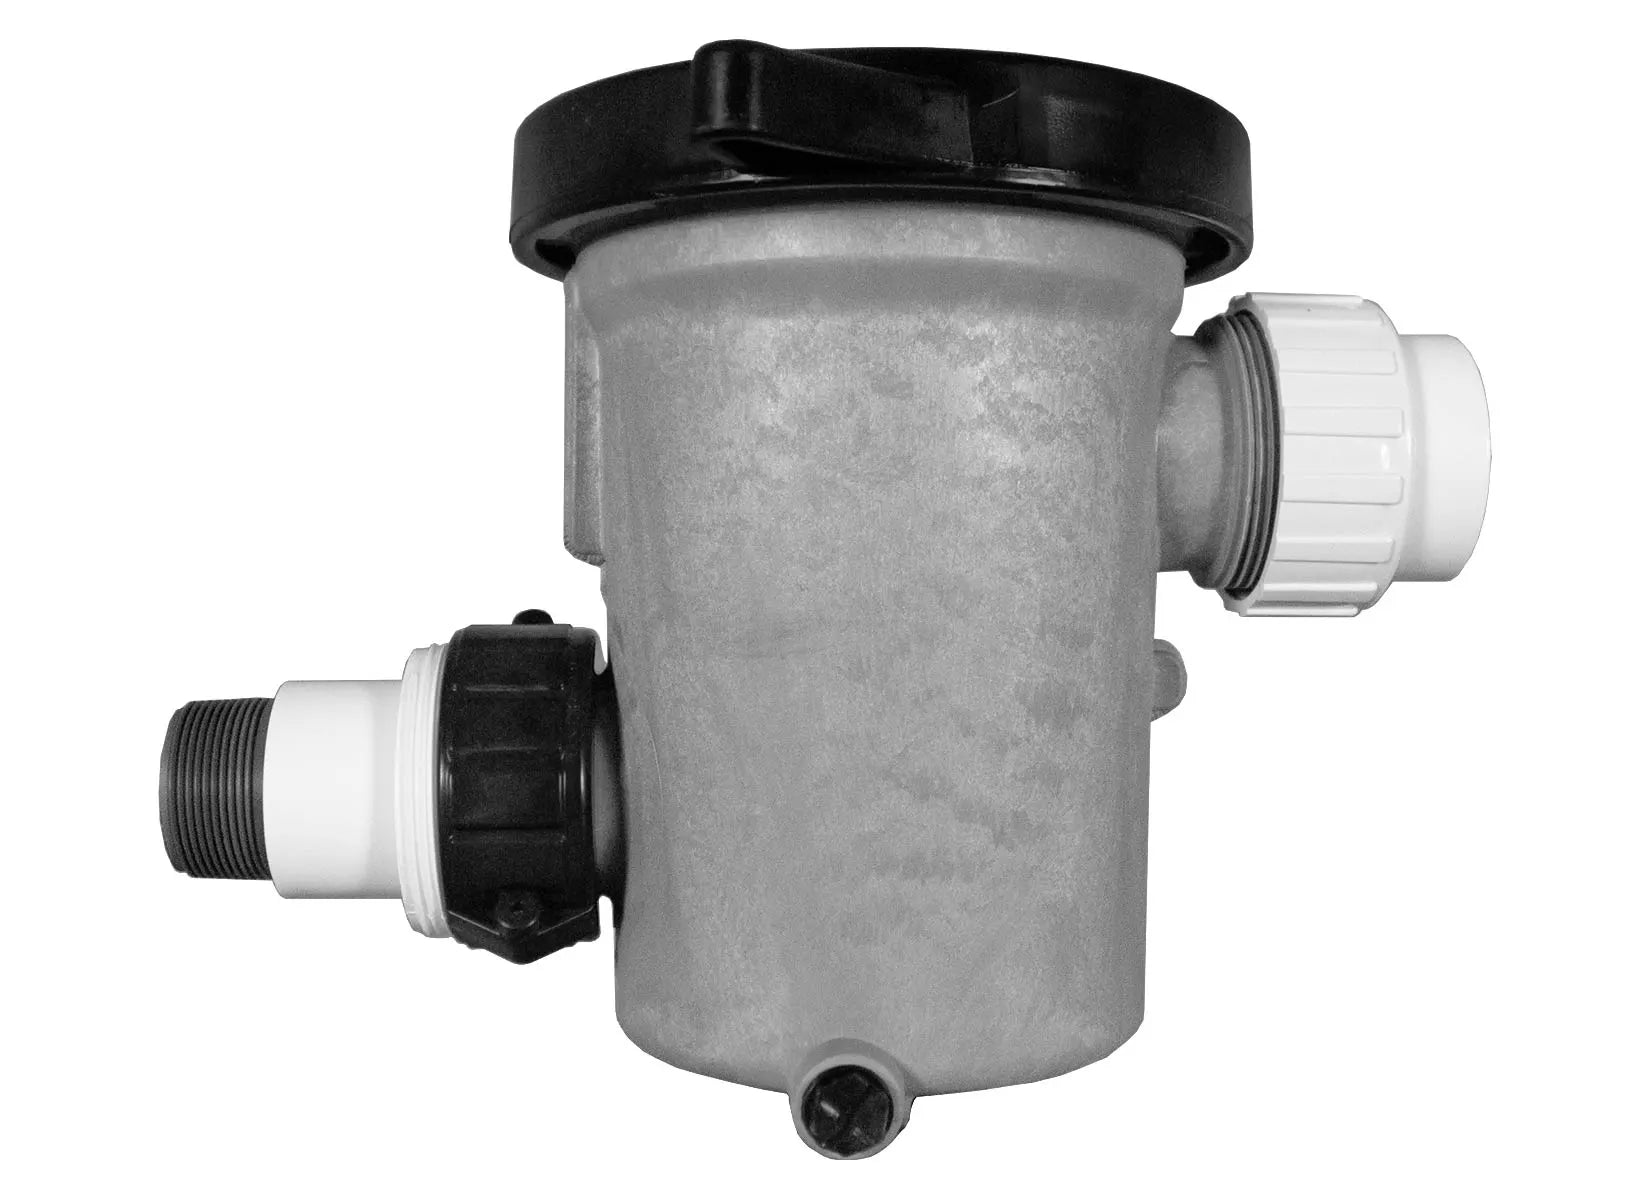 A grey plastic TAS water filter with a black hose designed to strain and purify water using a pump, the Sequence® Basket Strainer (WW).